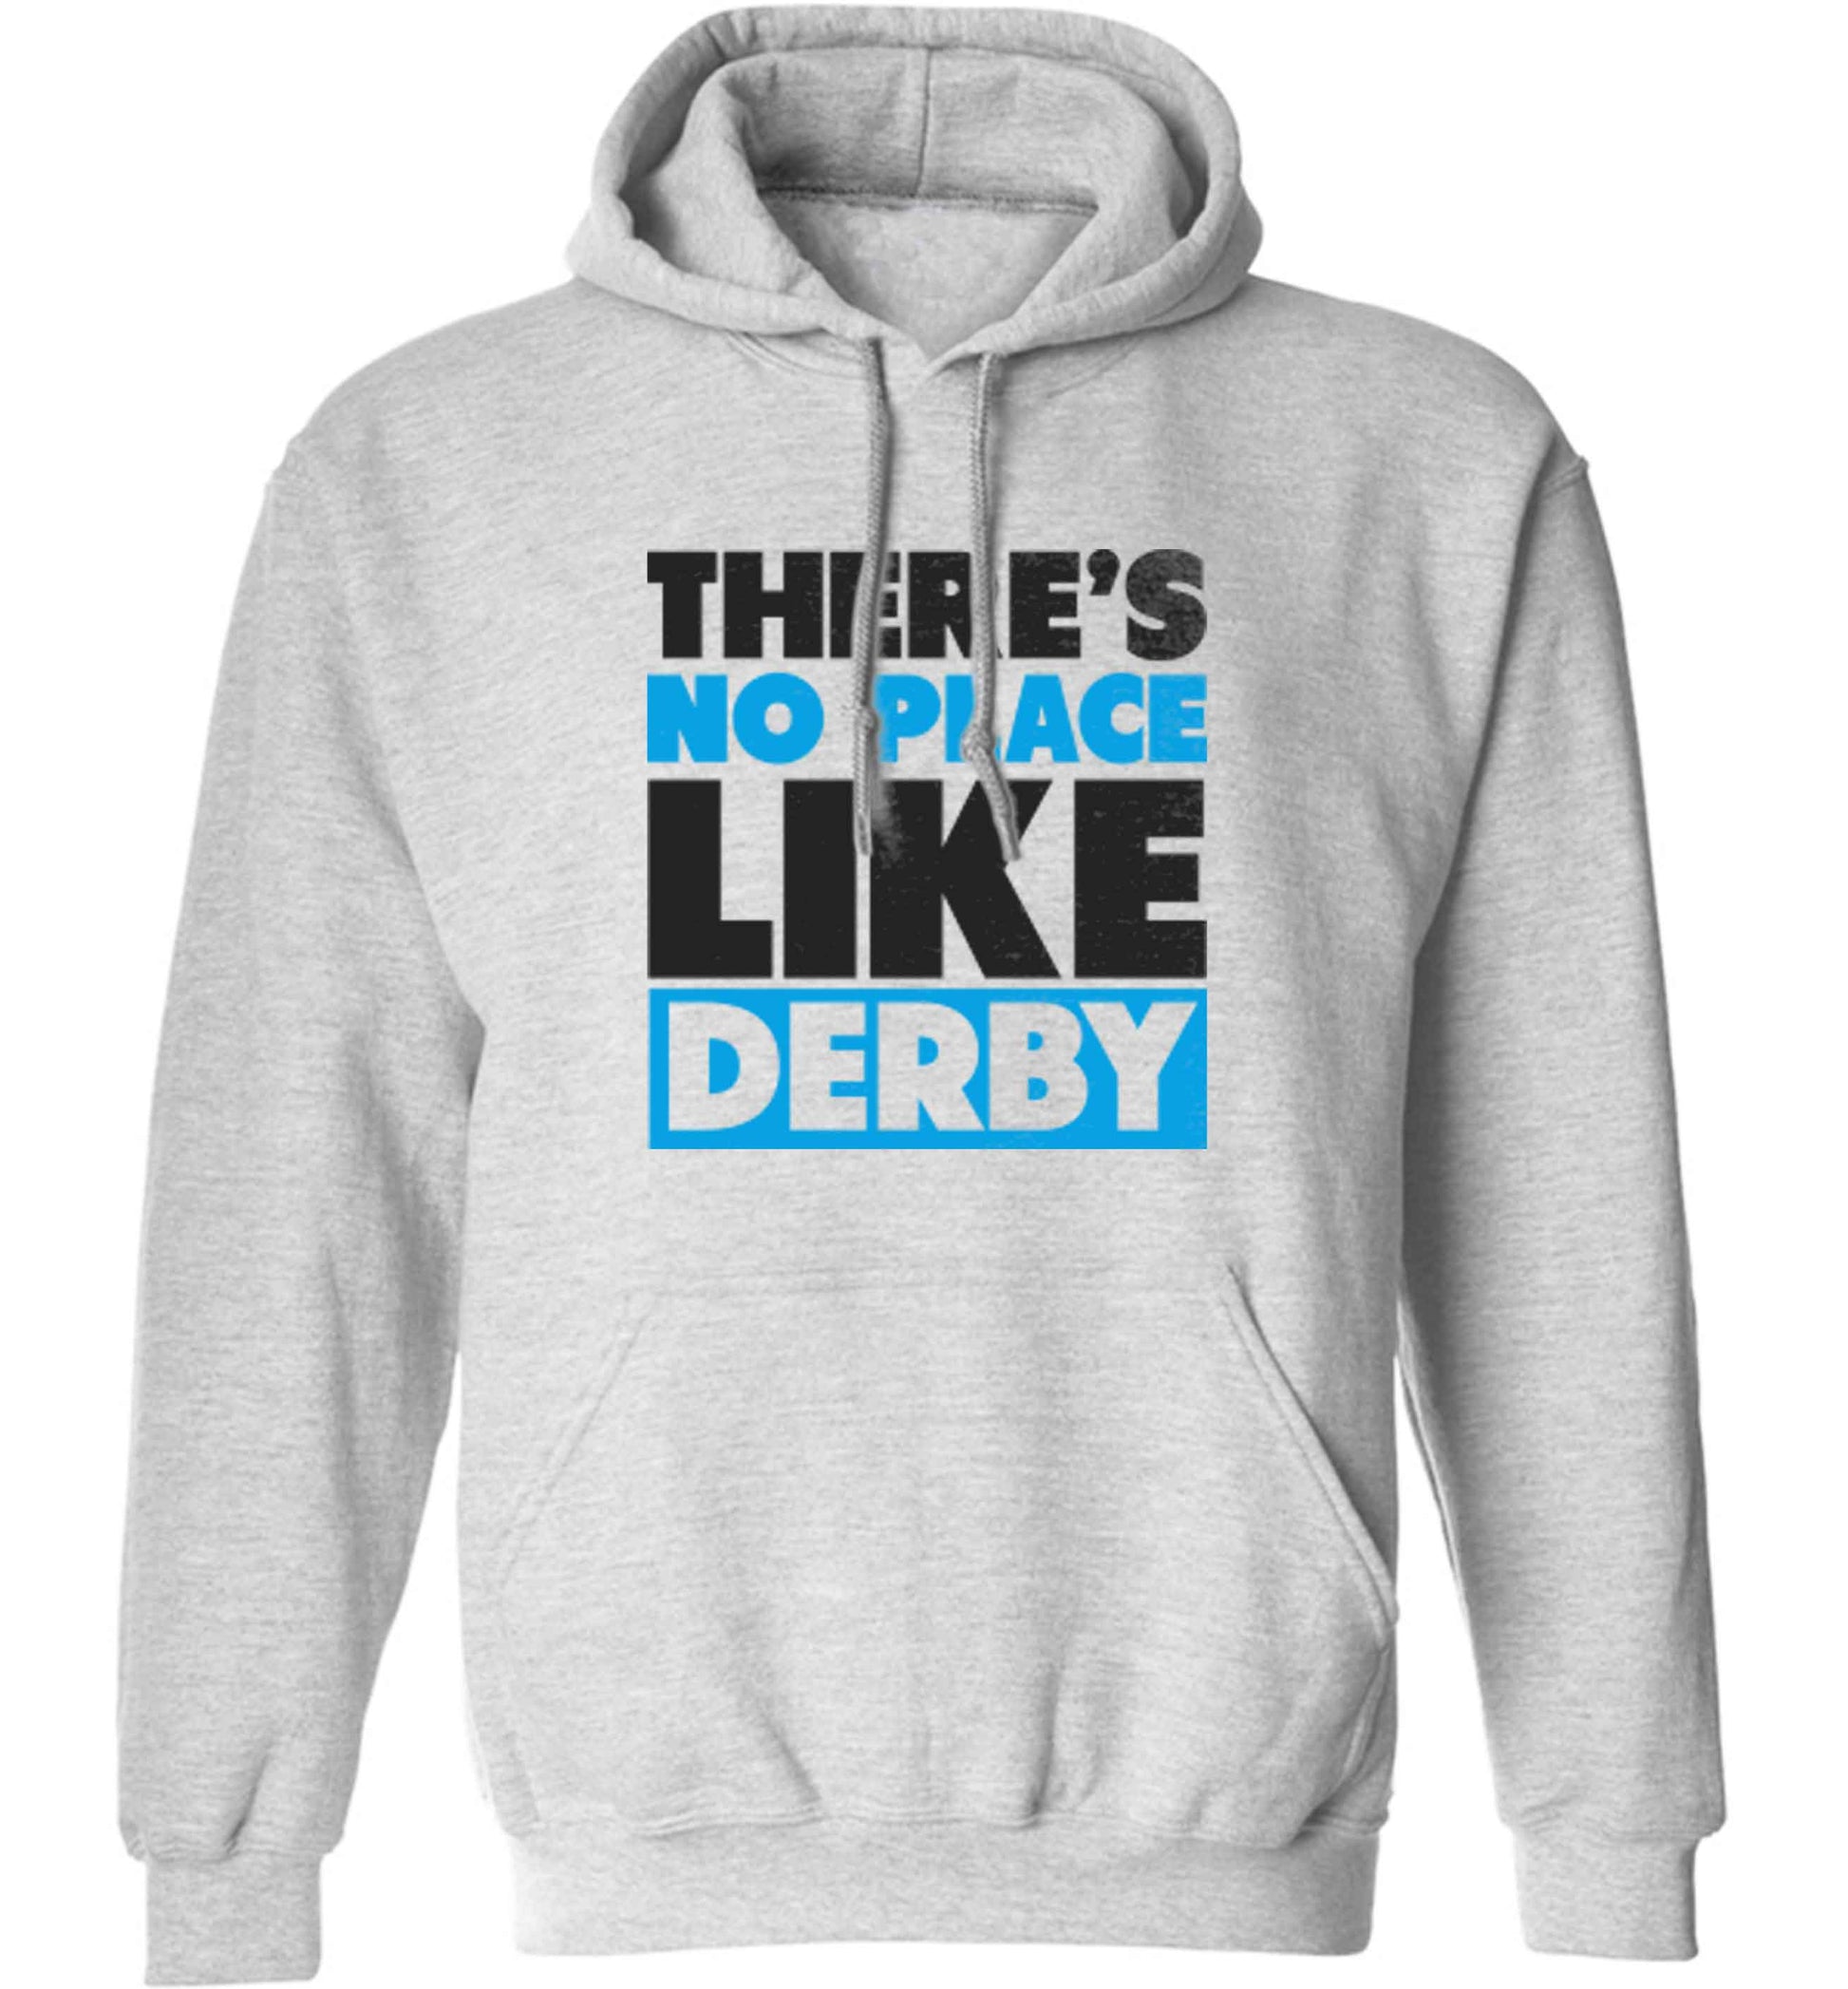 There's no place like Derby adults unisex grey hoodie 2XL